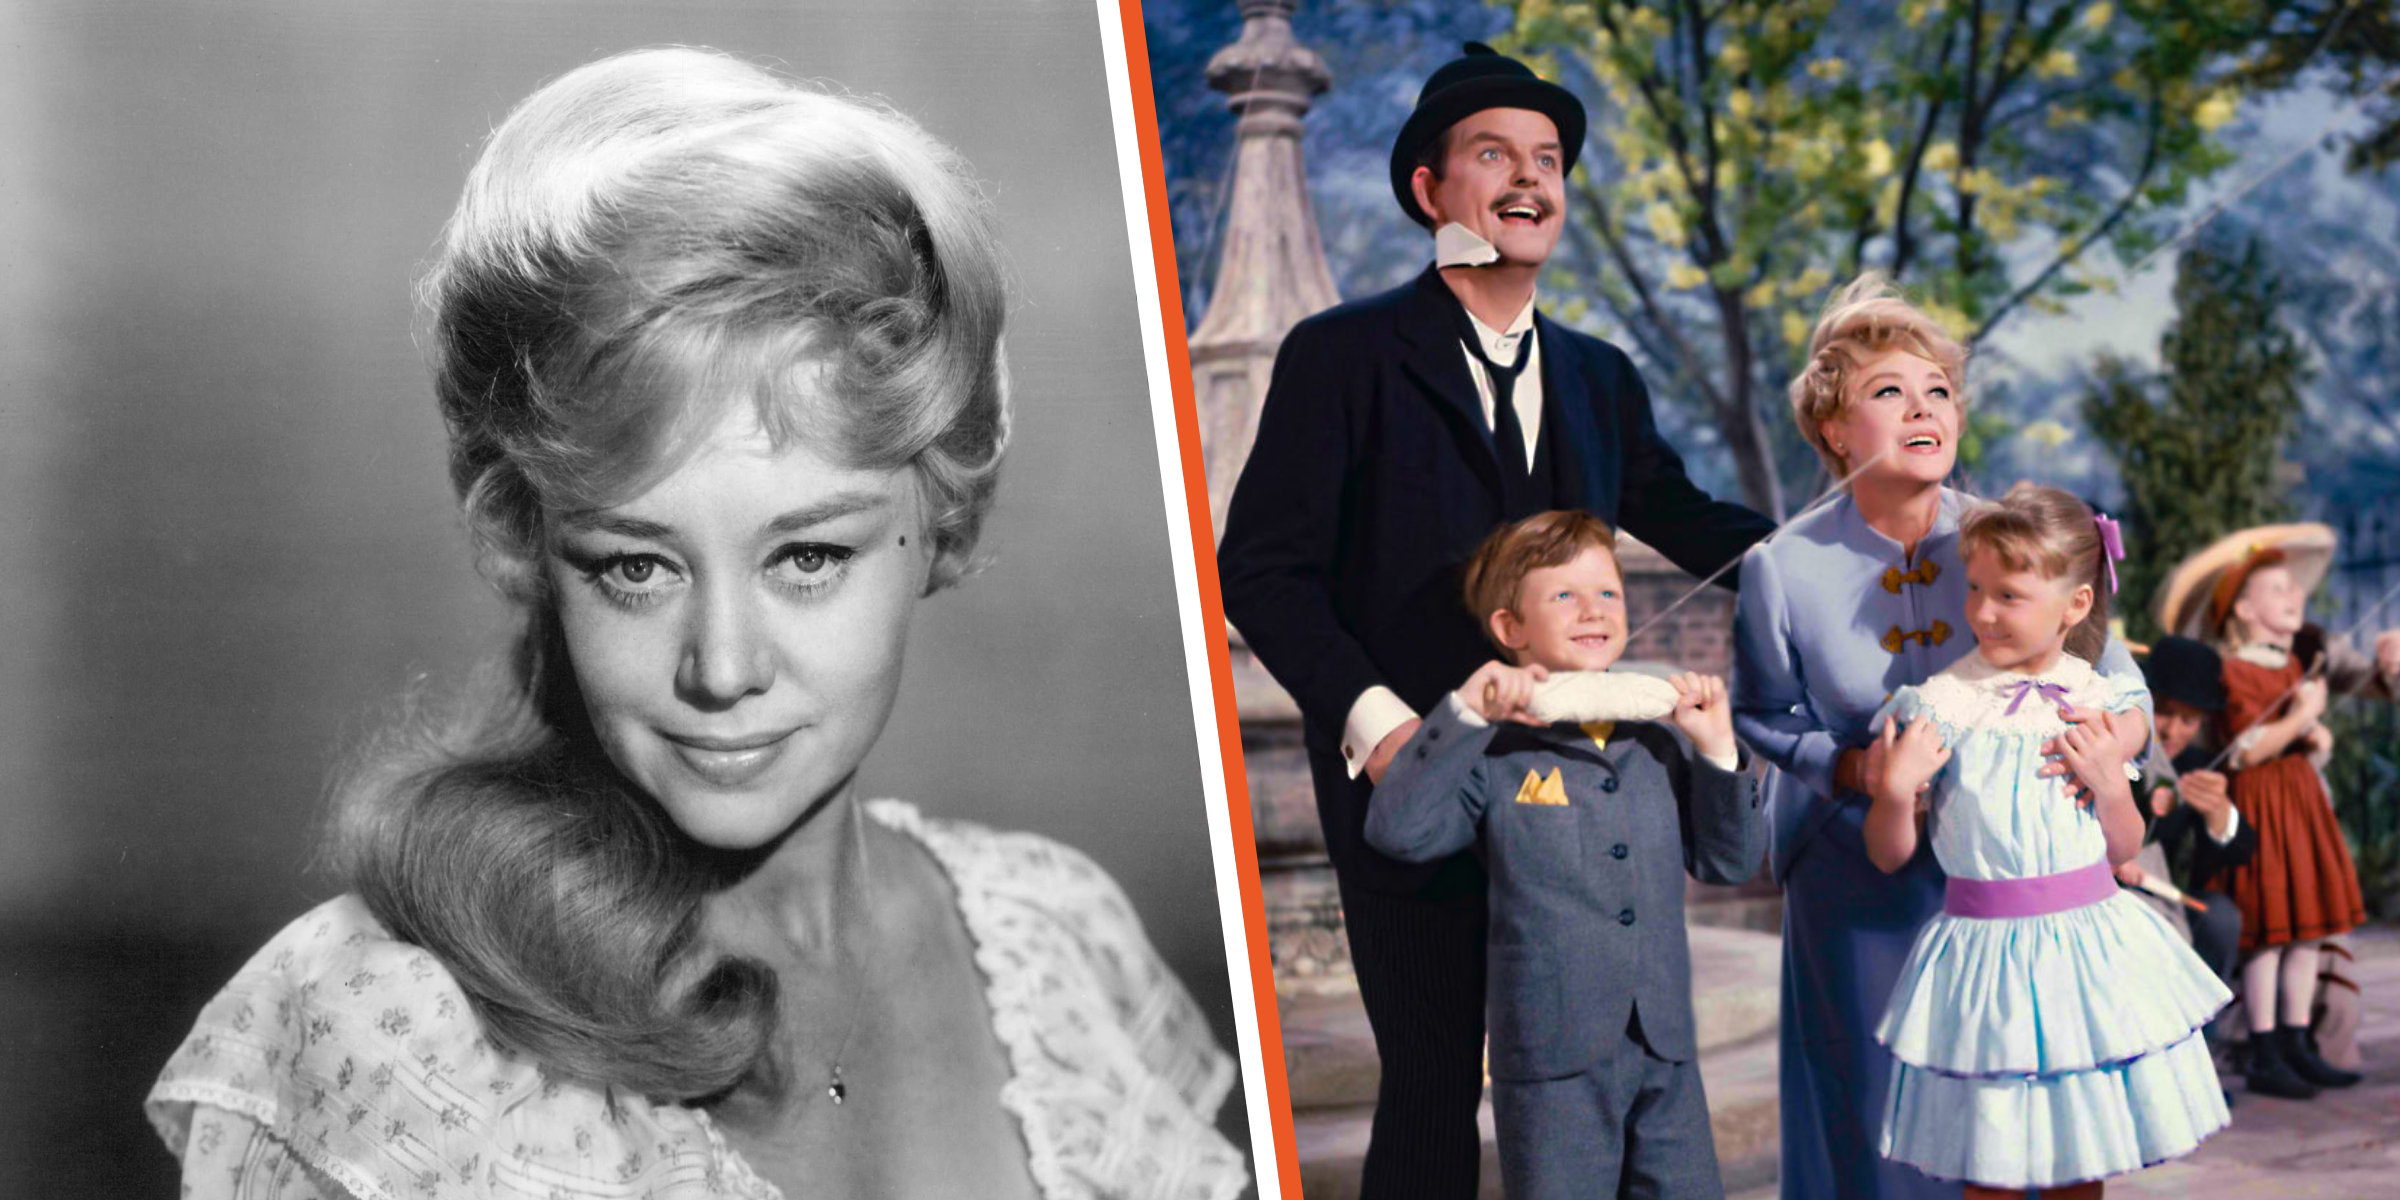 Glynis Johns | Glynis Johns with the cast of "Mary Poppins" | Source: Getty Images